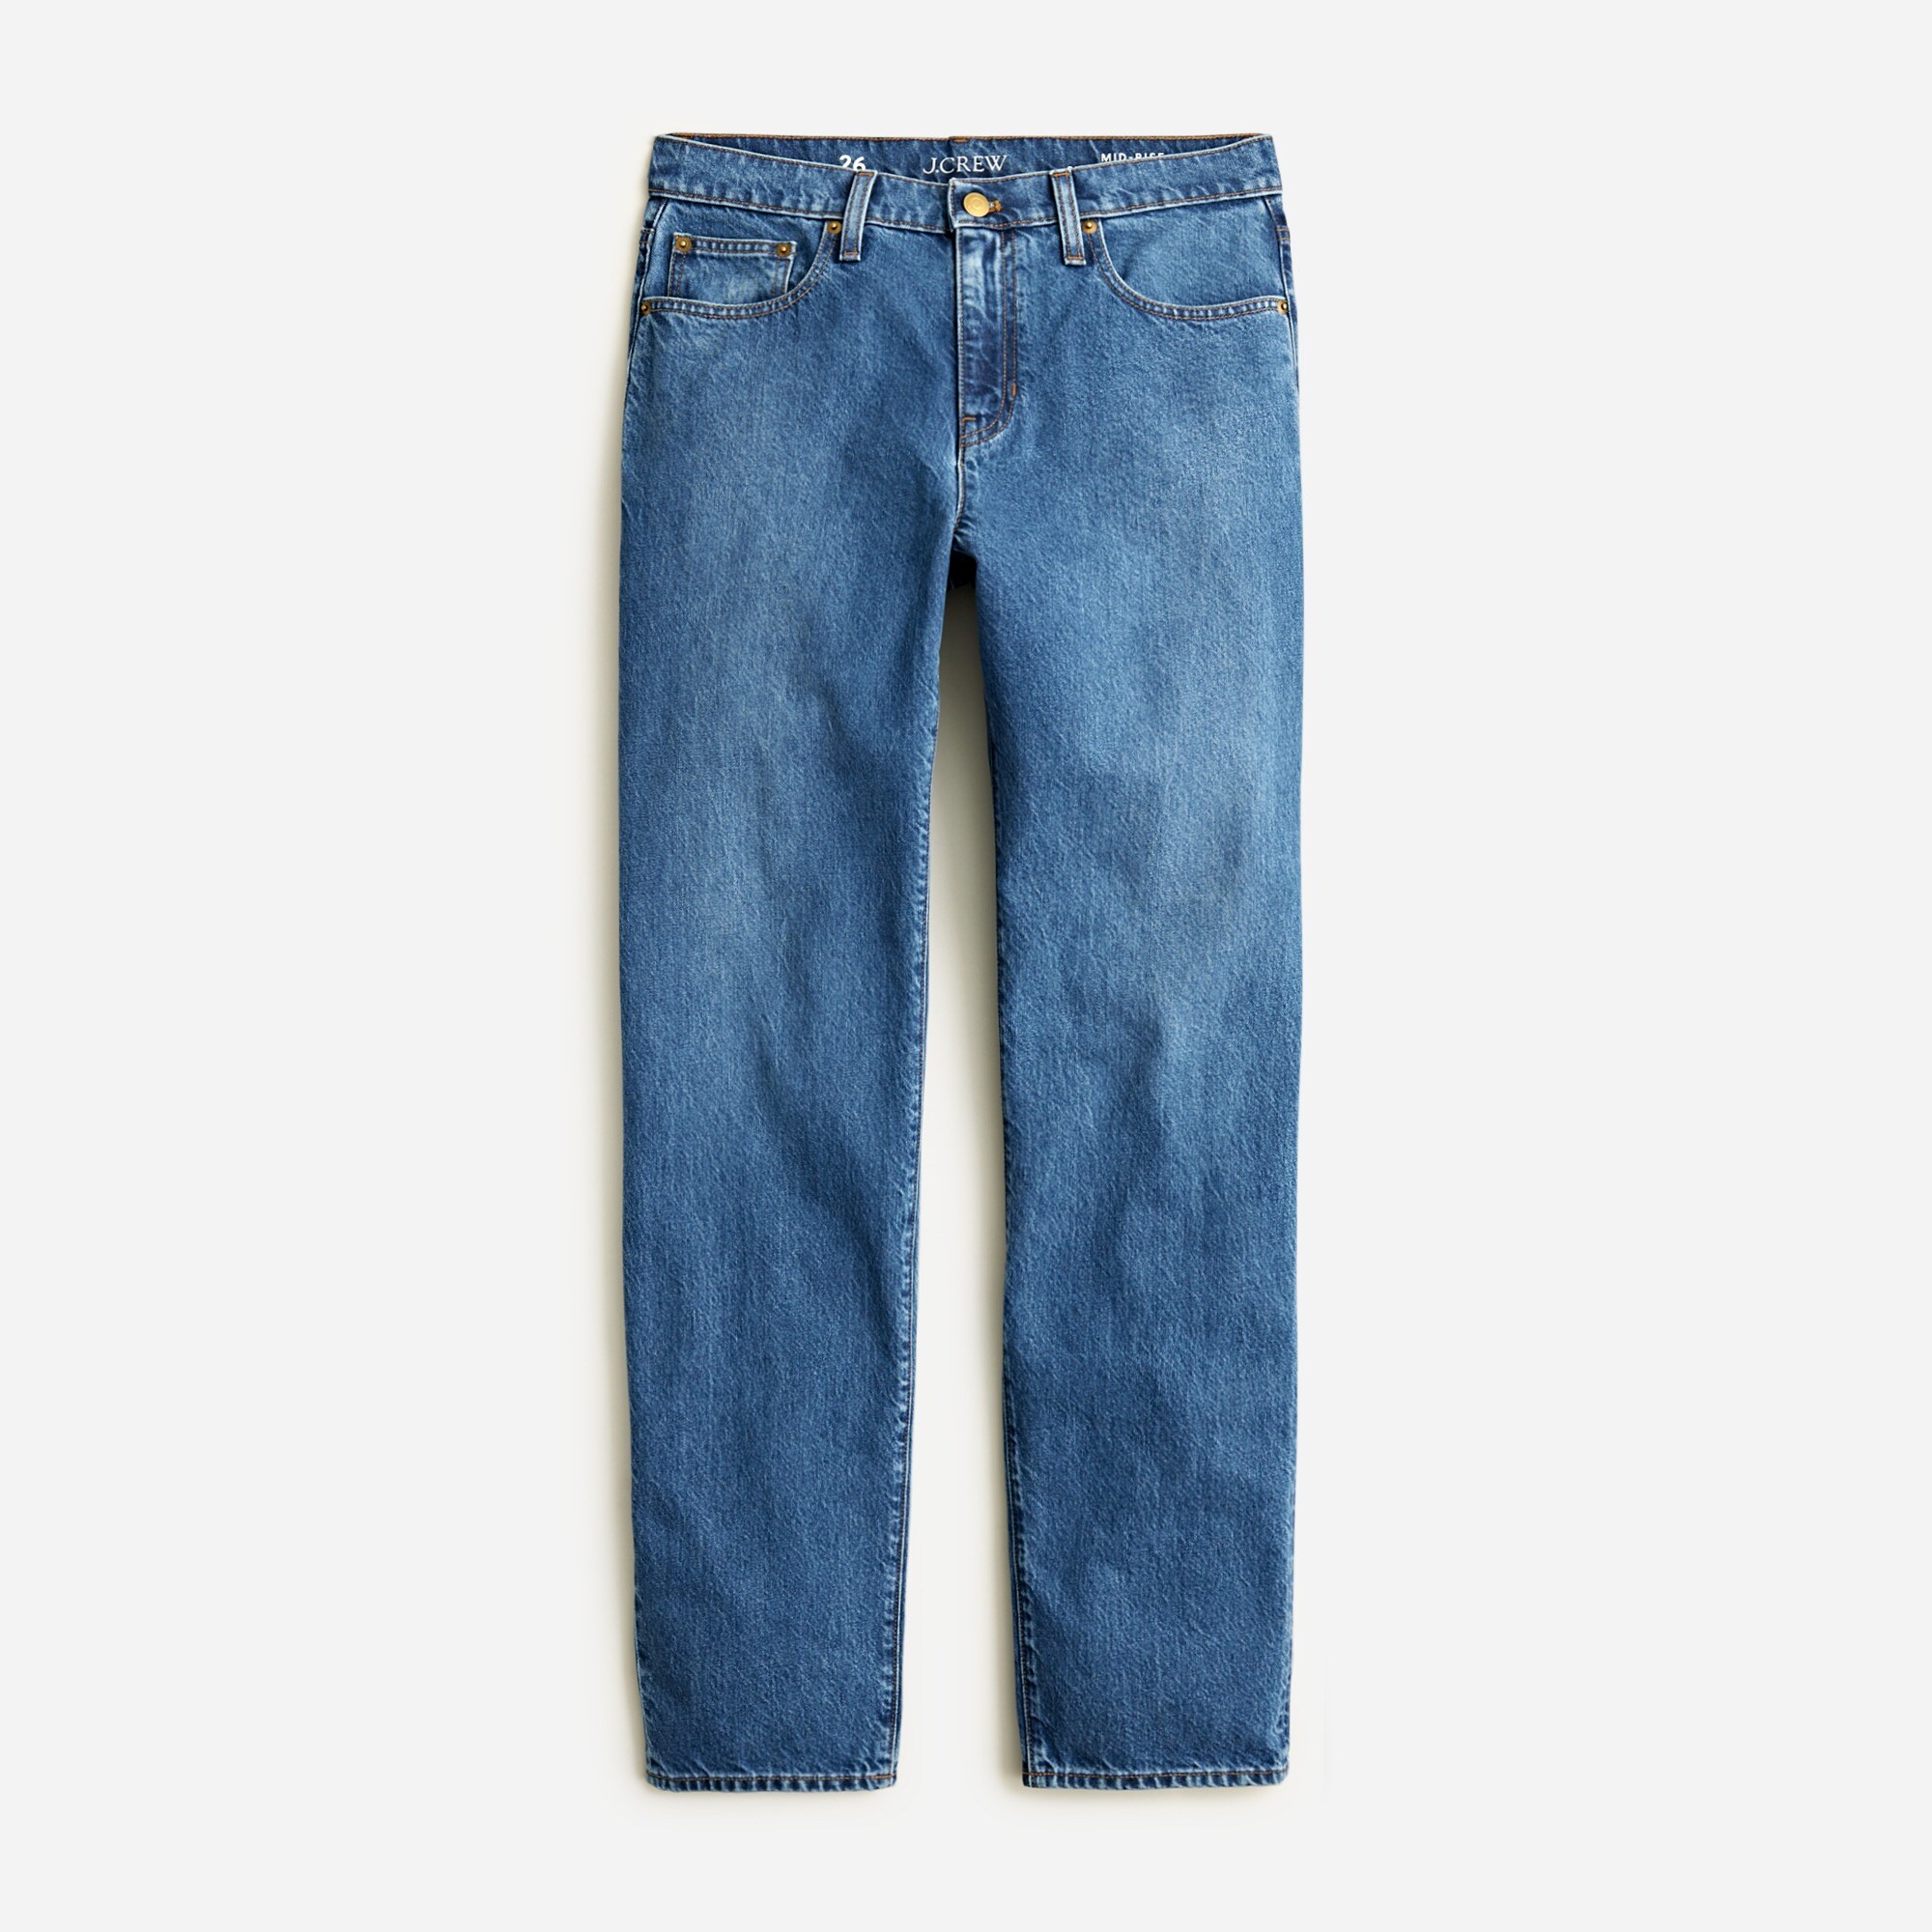  Slouchy-straight jean in Turney wash